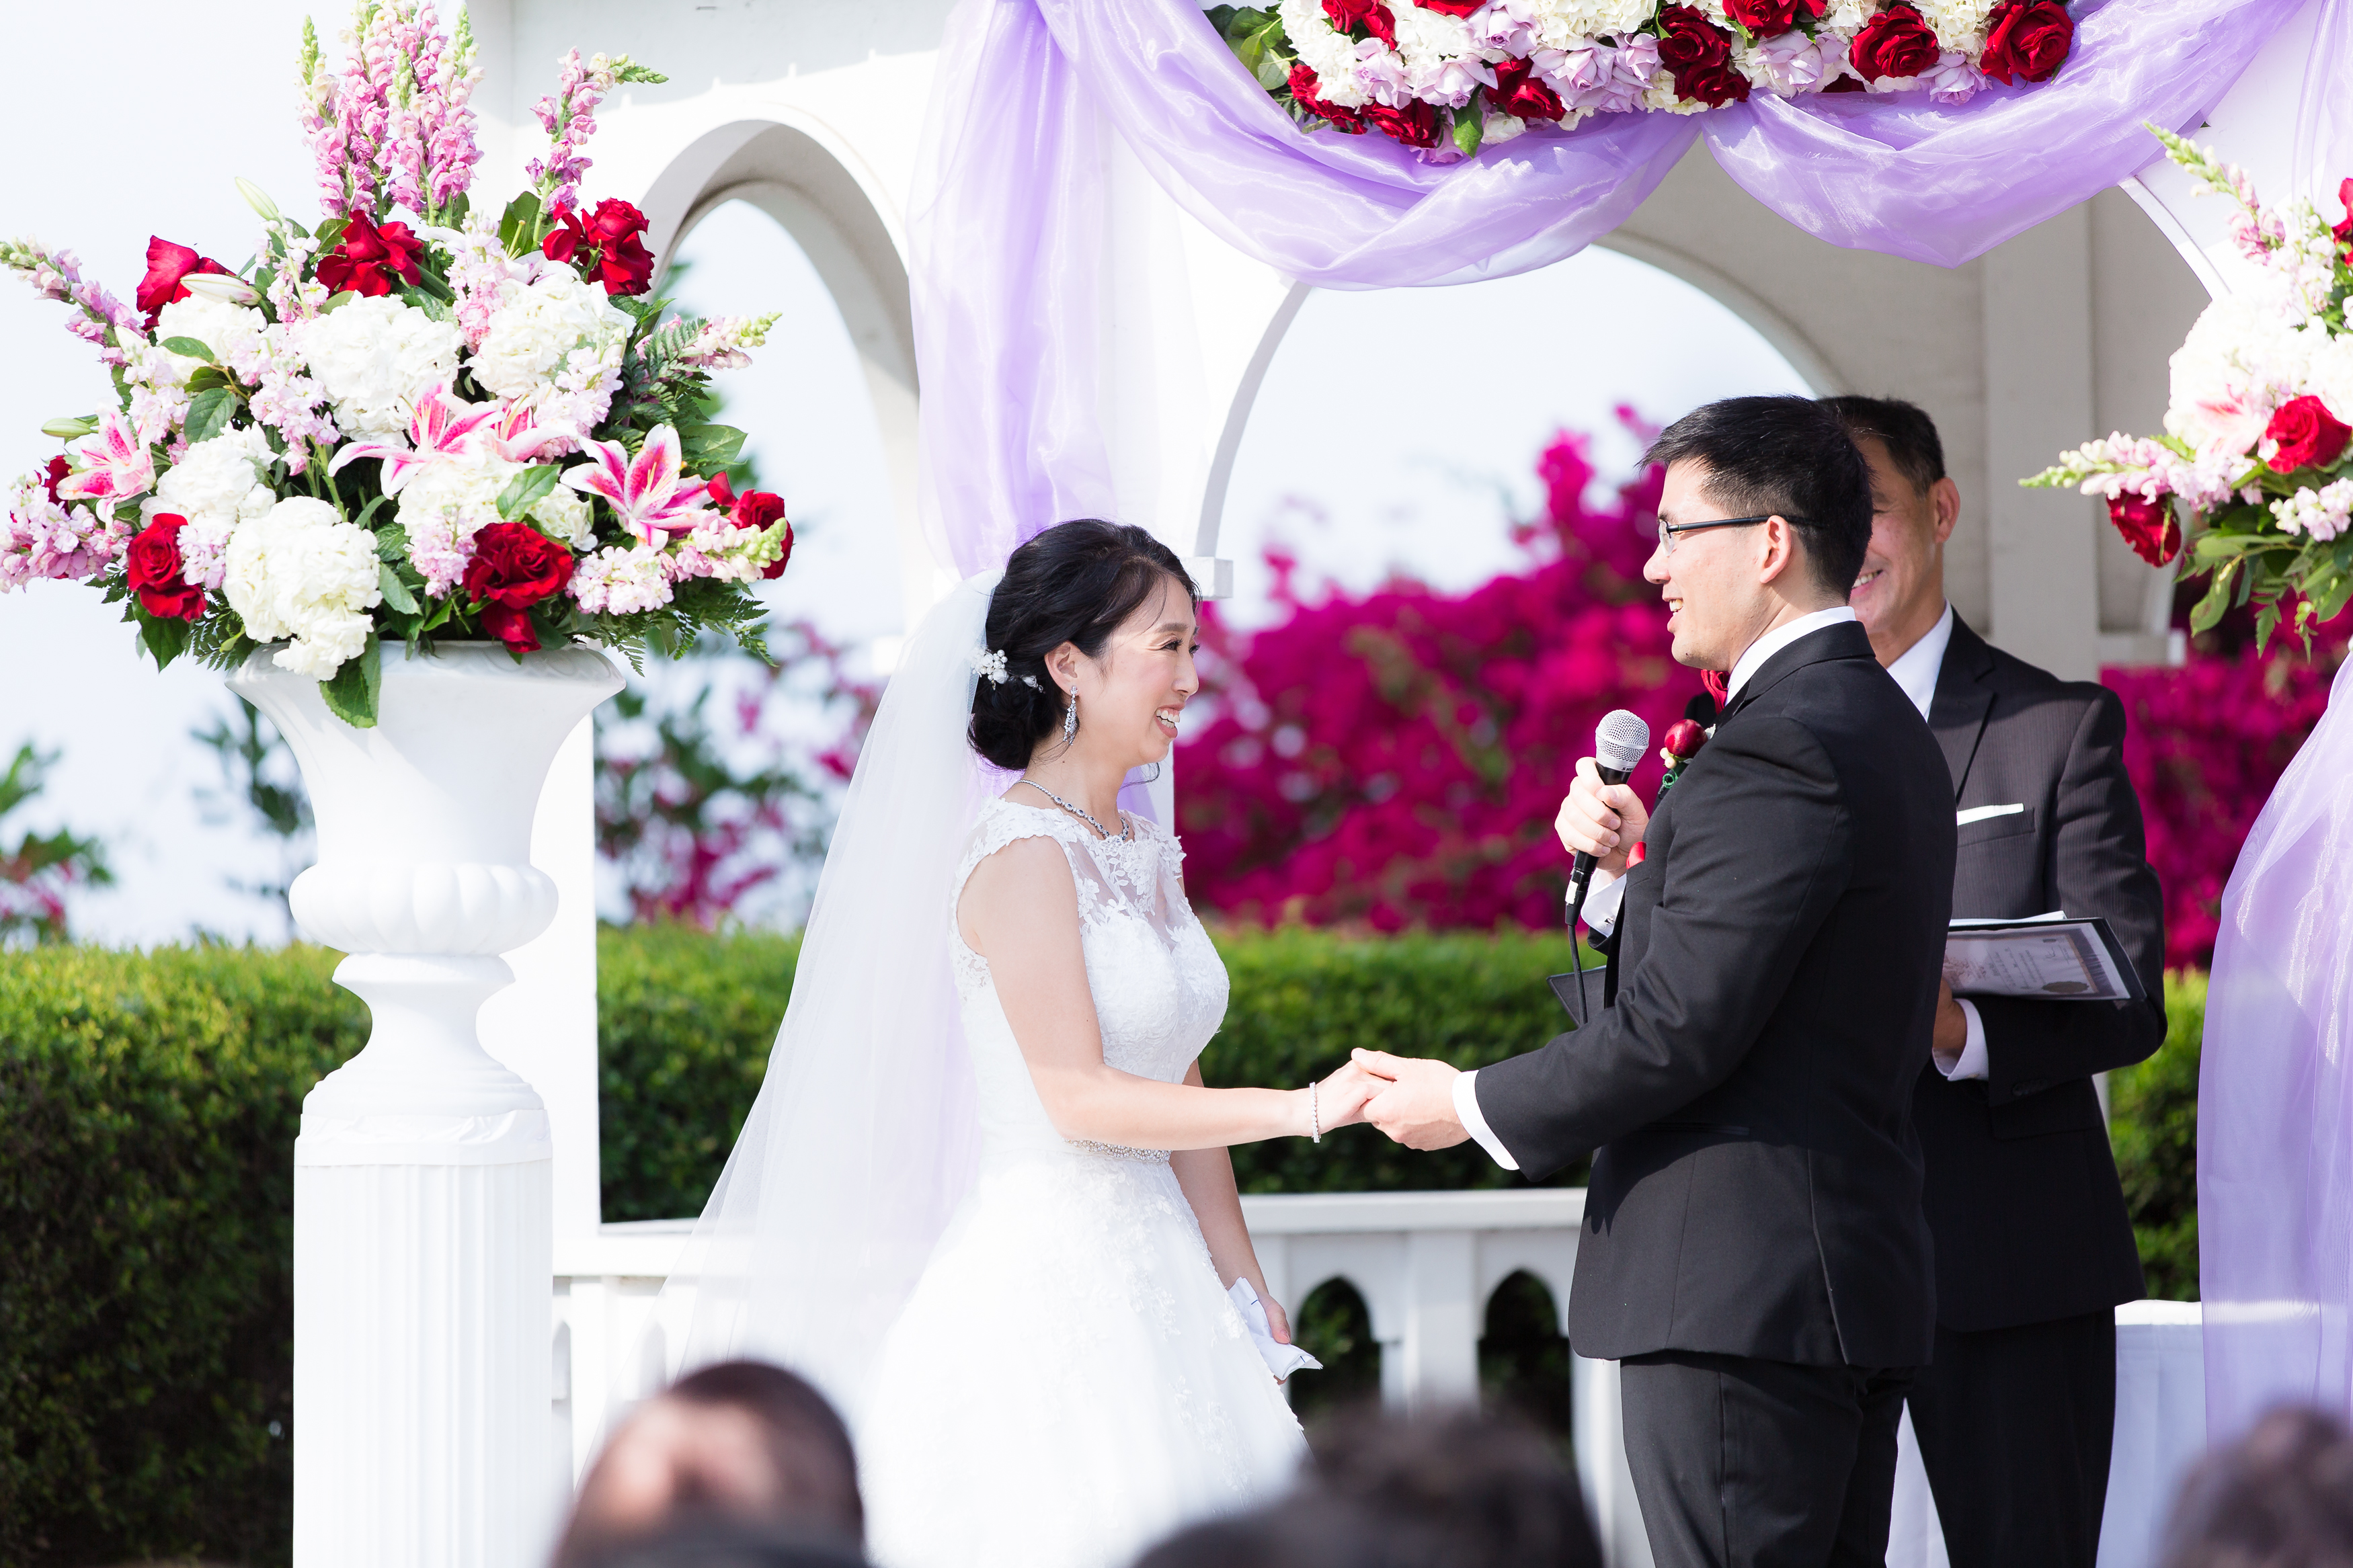 Wedding couple laughing while exchanging vows and holding hands